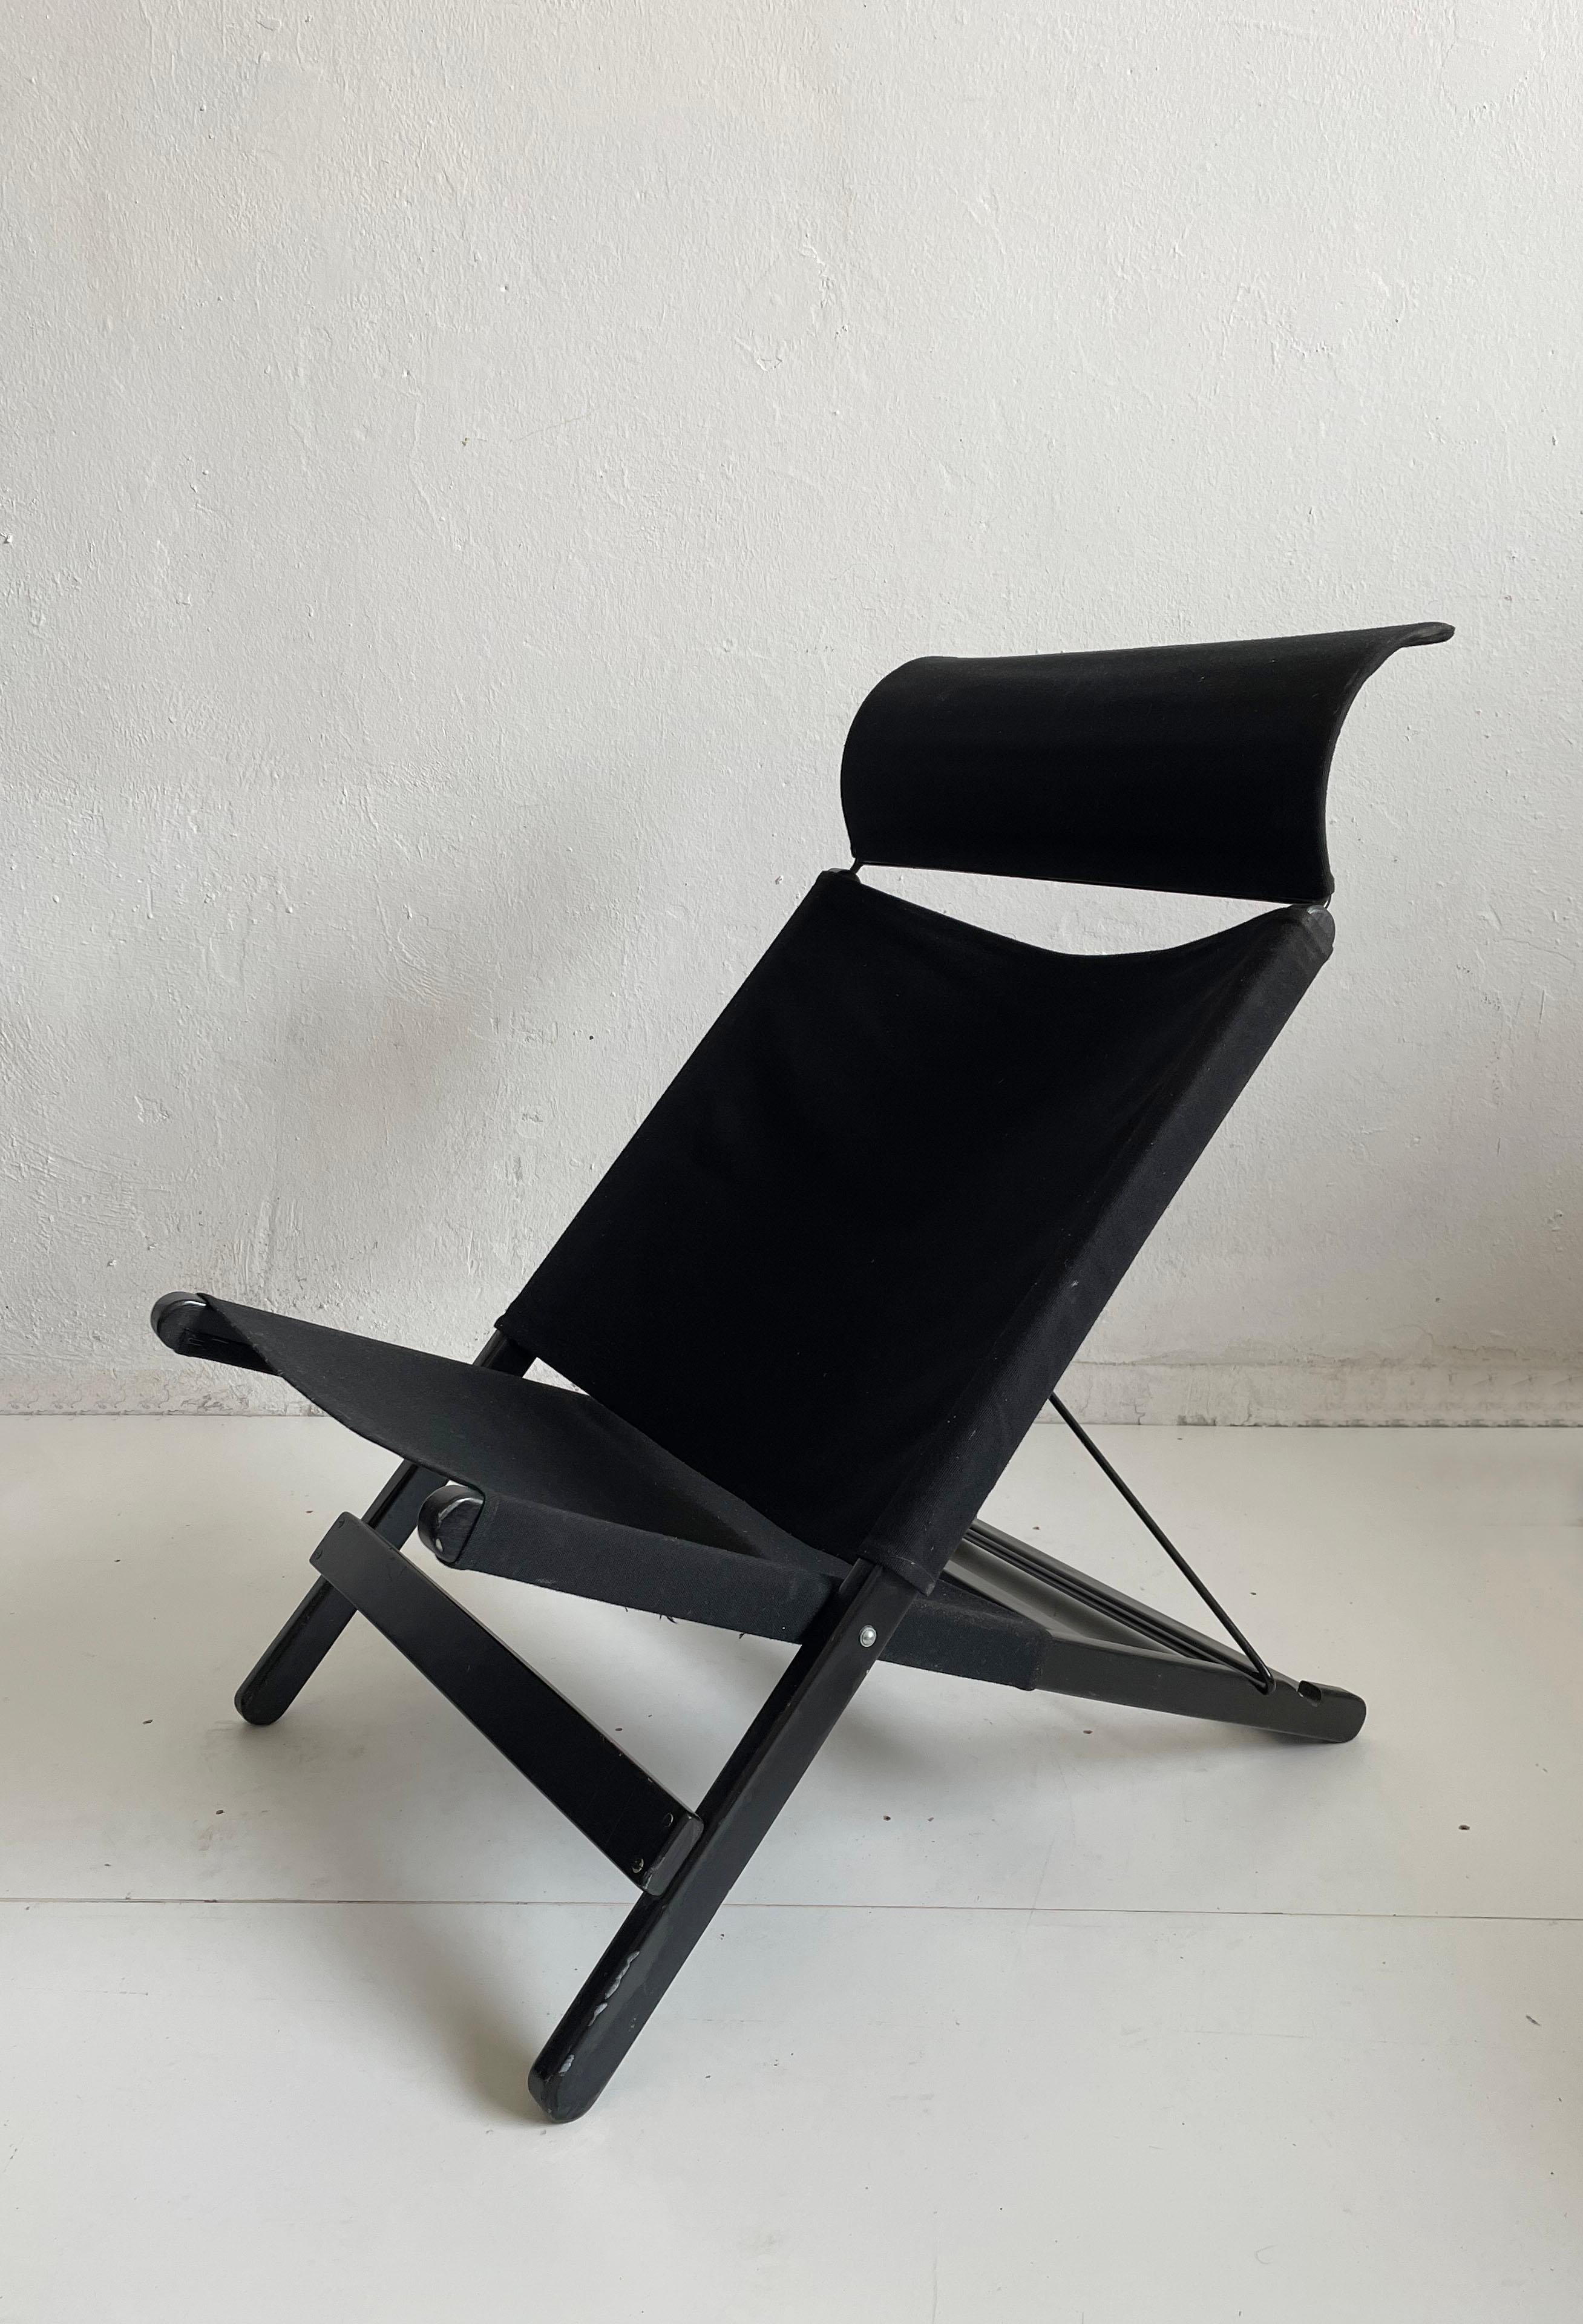 Vintage Hestra folding chair designed by Tord Bjorklund for Ikea and produced in the late 1980s, early 1990s. 
The chair has an adjustable back (2 positions) and a removable headrest. The frame is made of black lacquered wood and the seating is